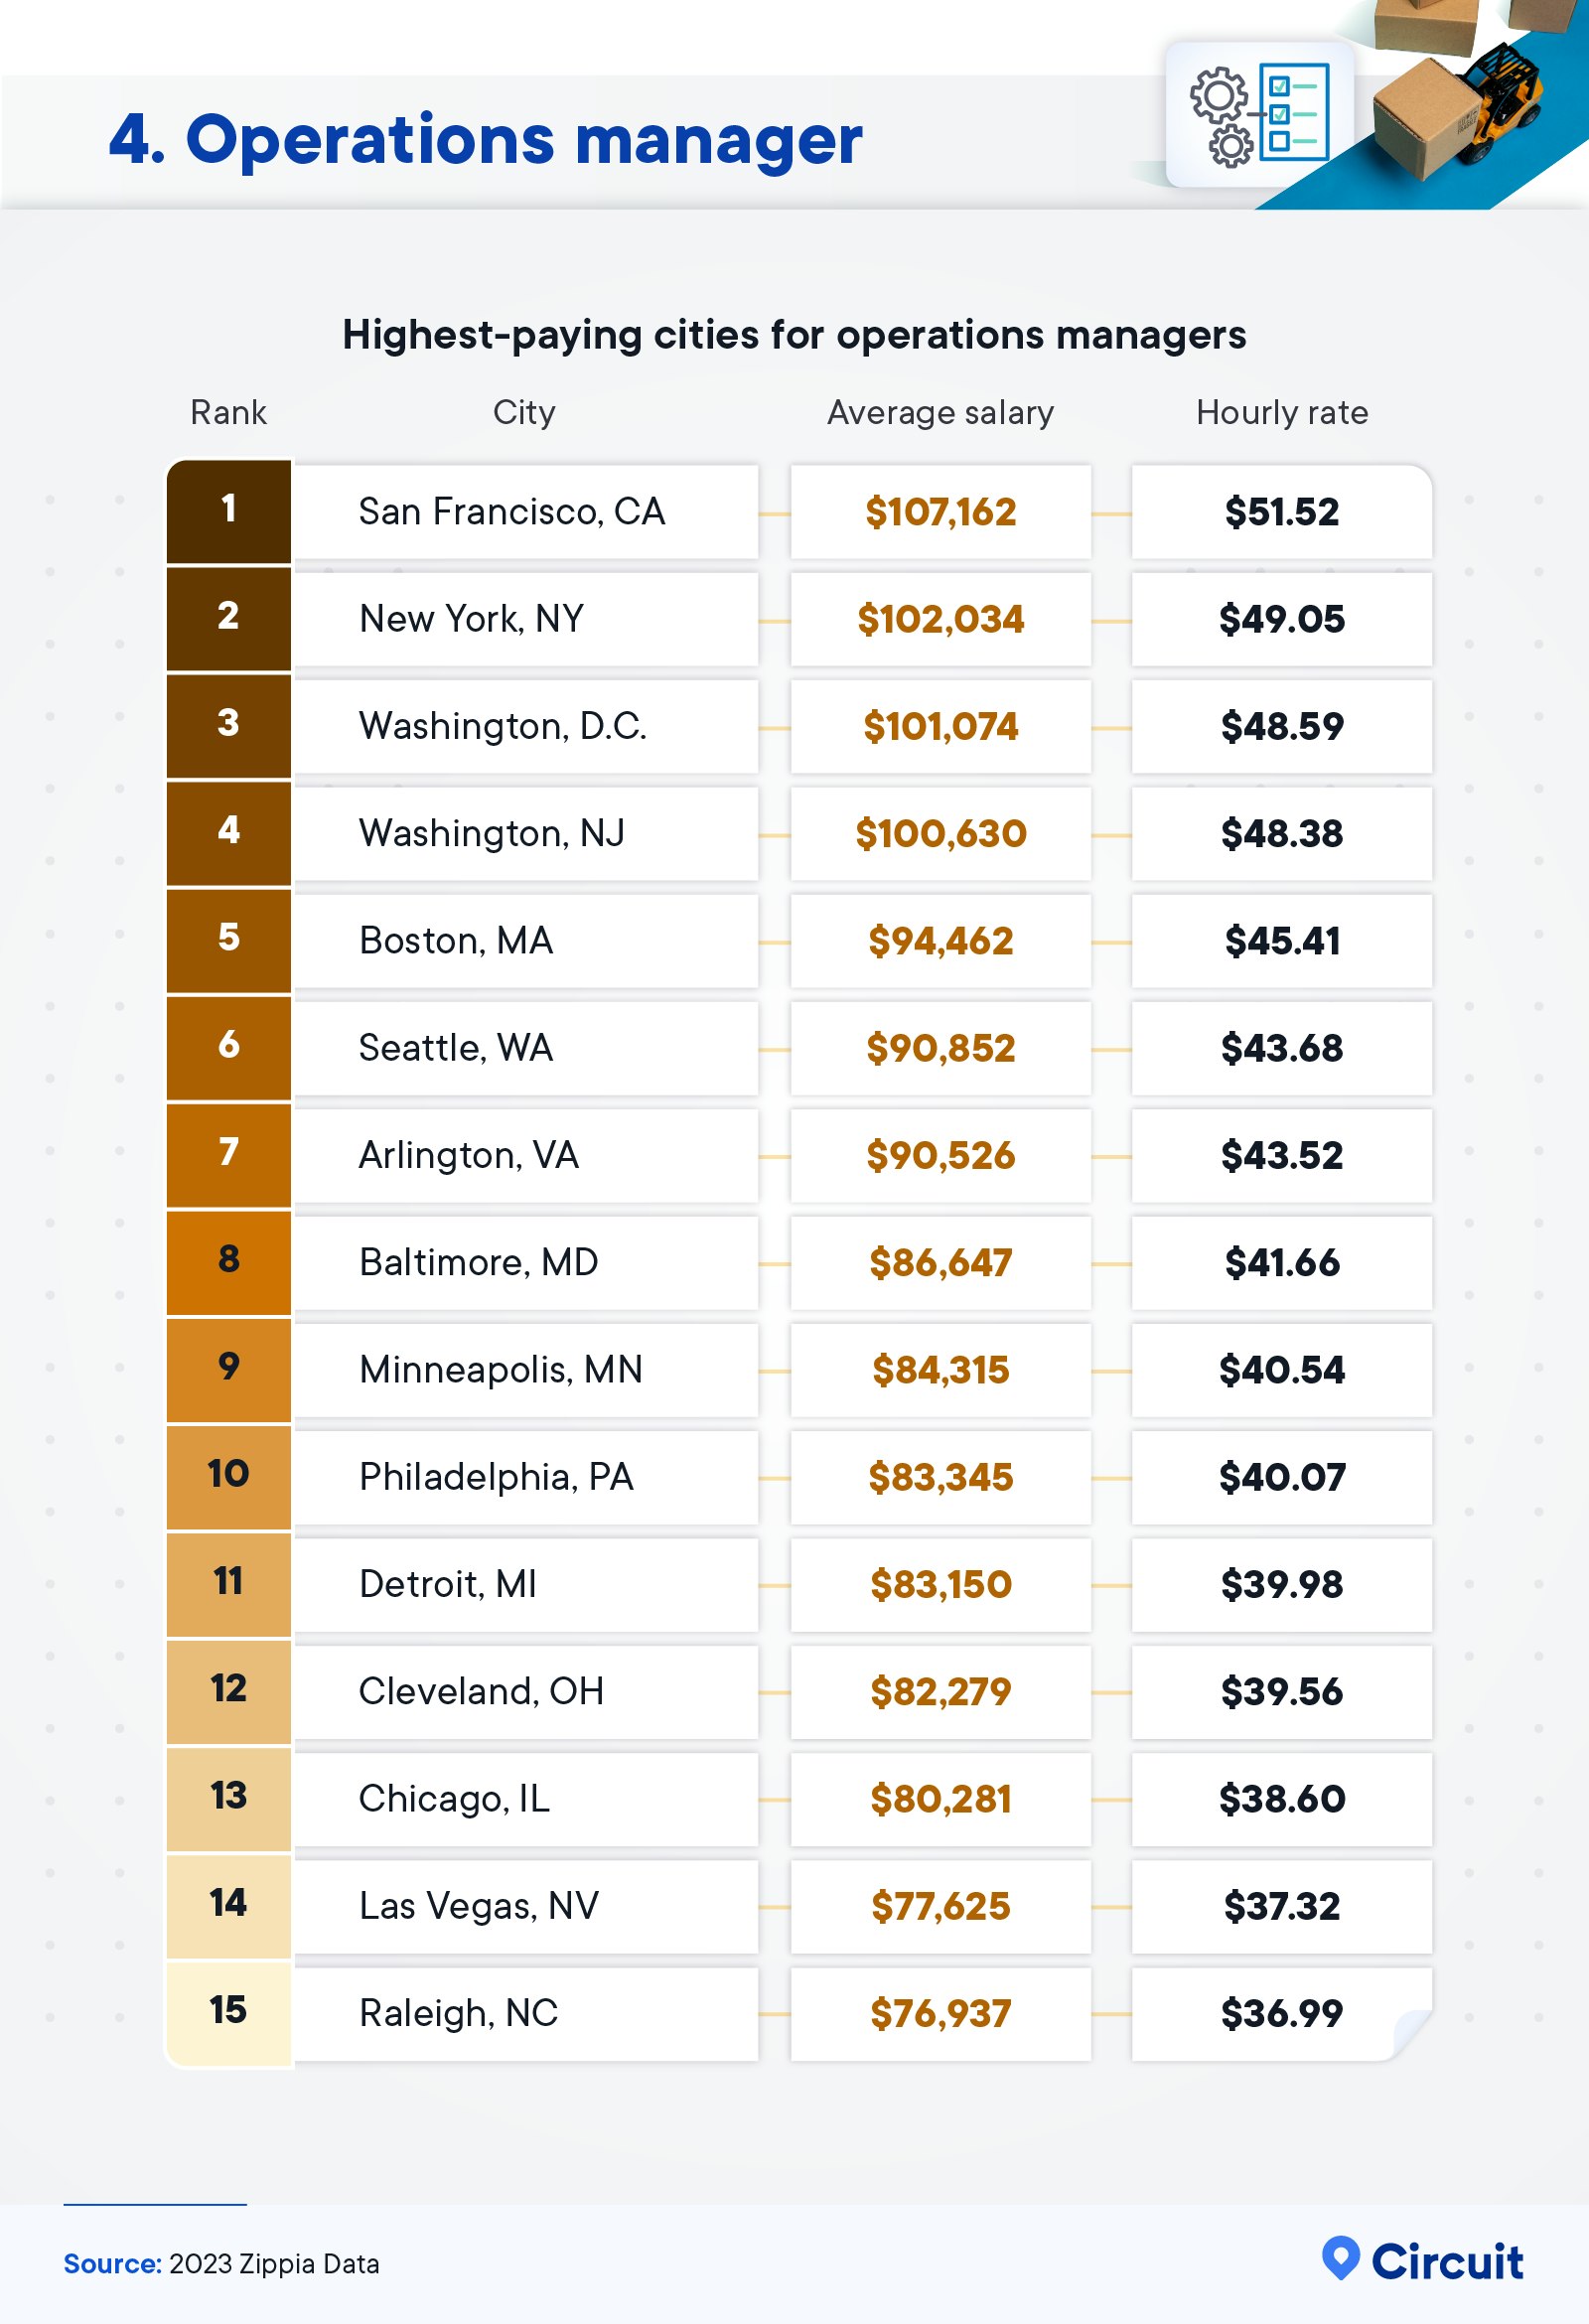 Highest-paying cities for operations managers